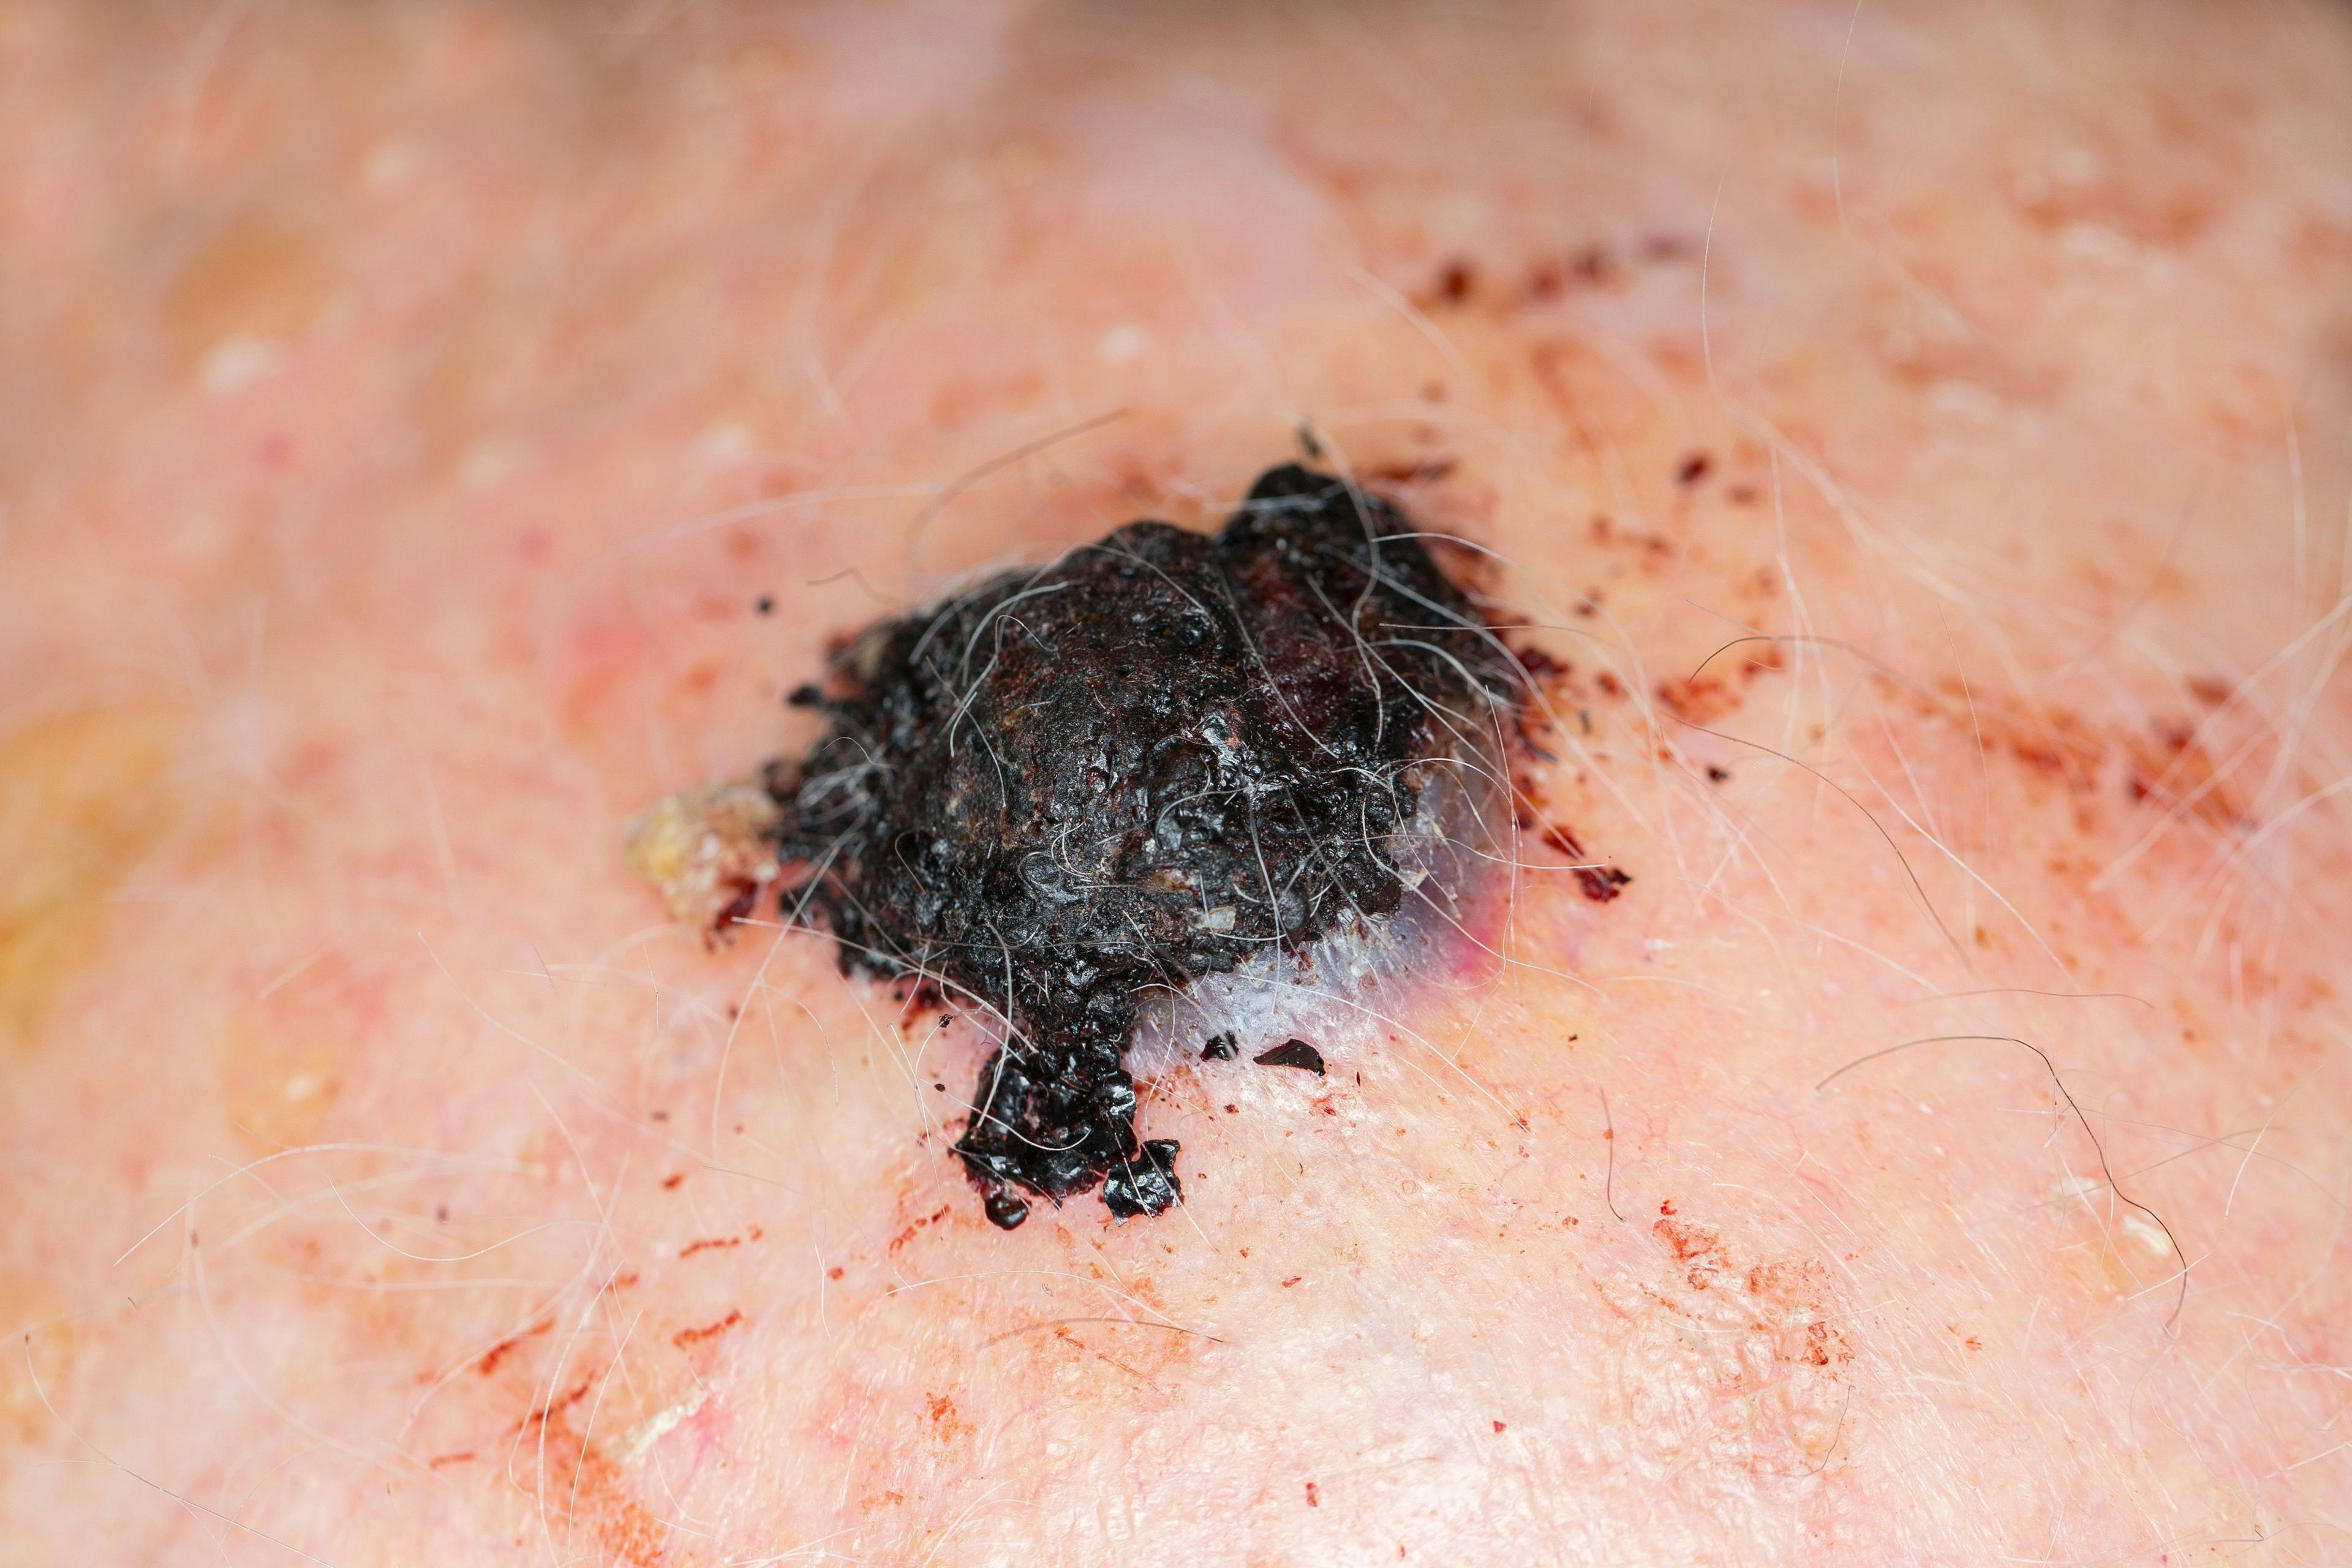 Interventions in Minimal Residual Disease Lead to Long-Term Melanoma Control